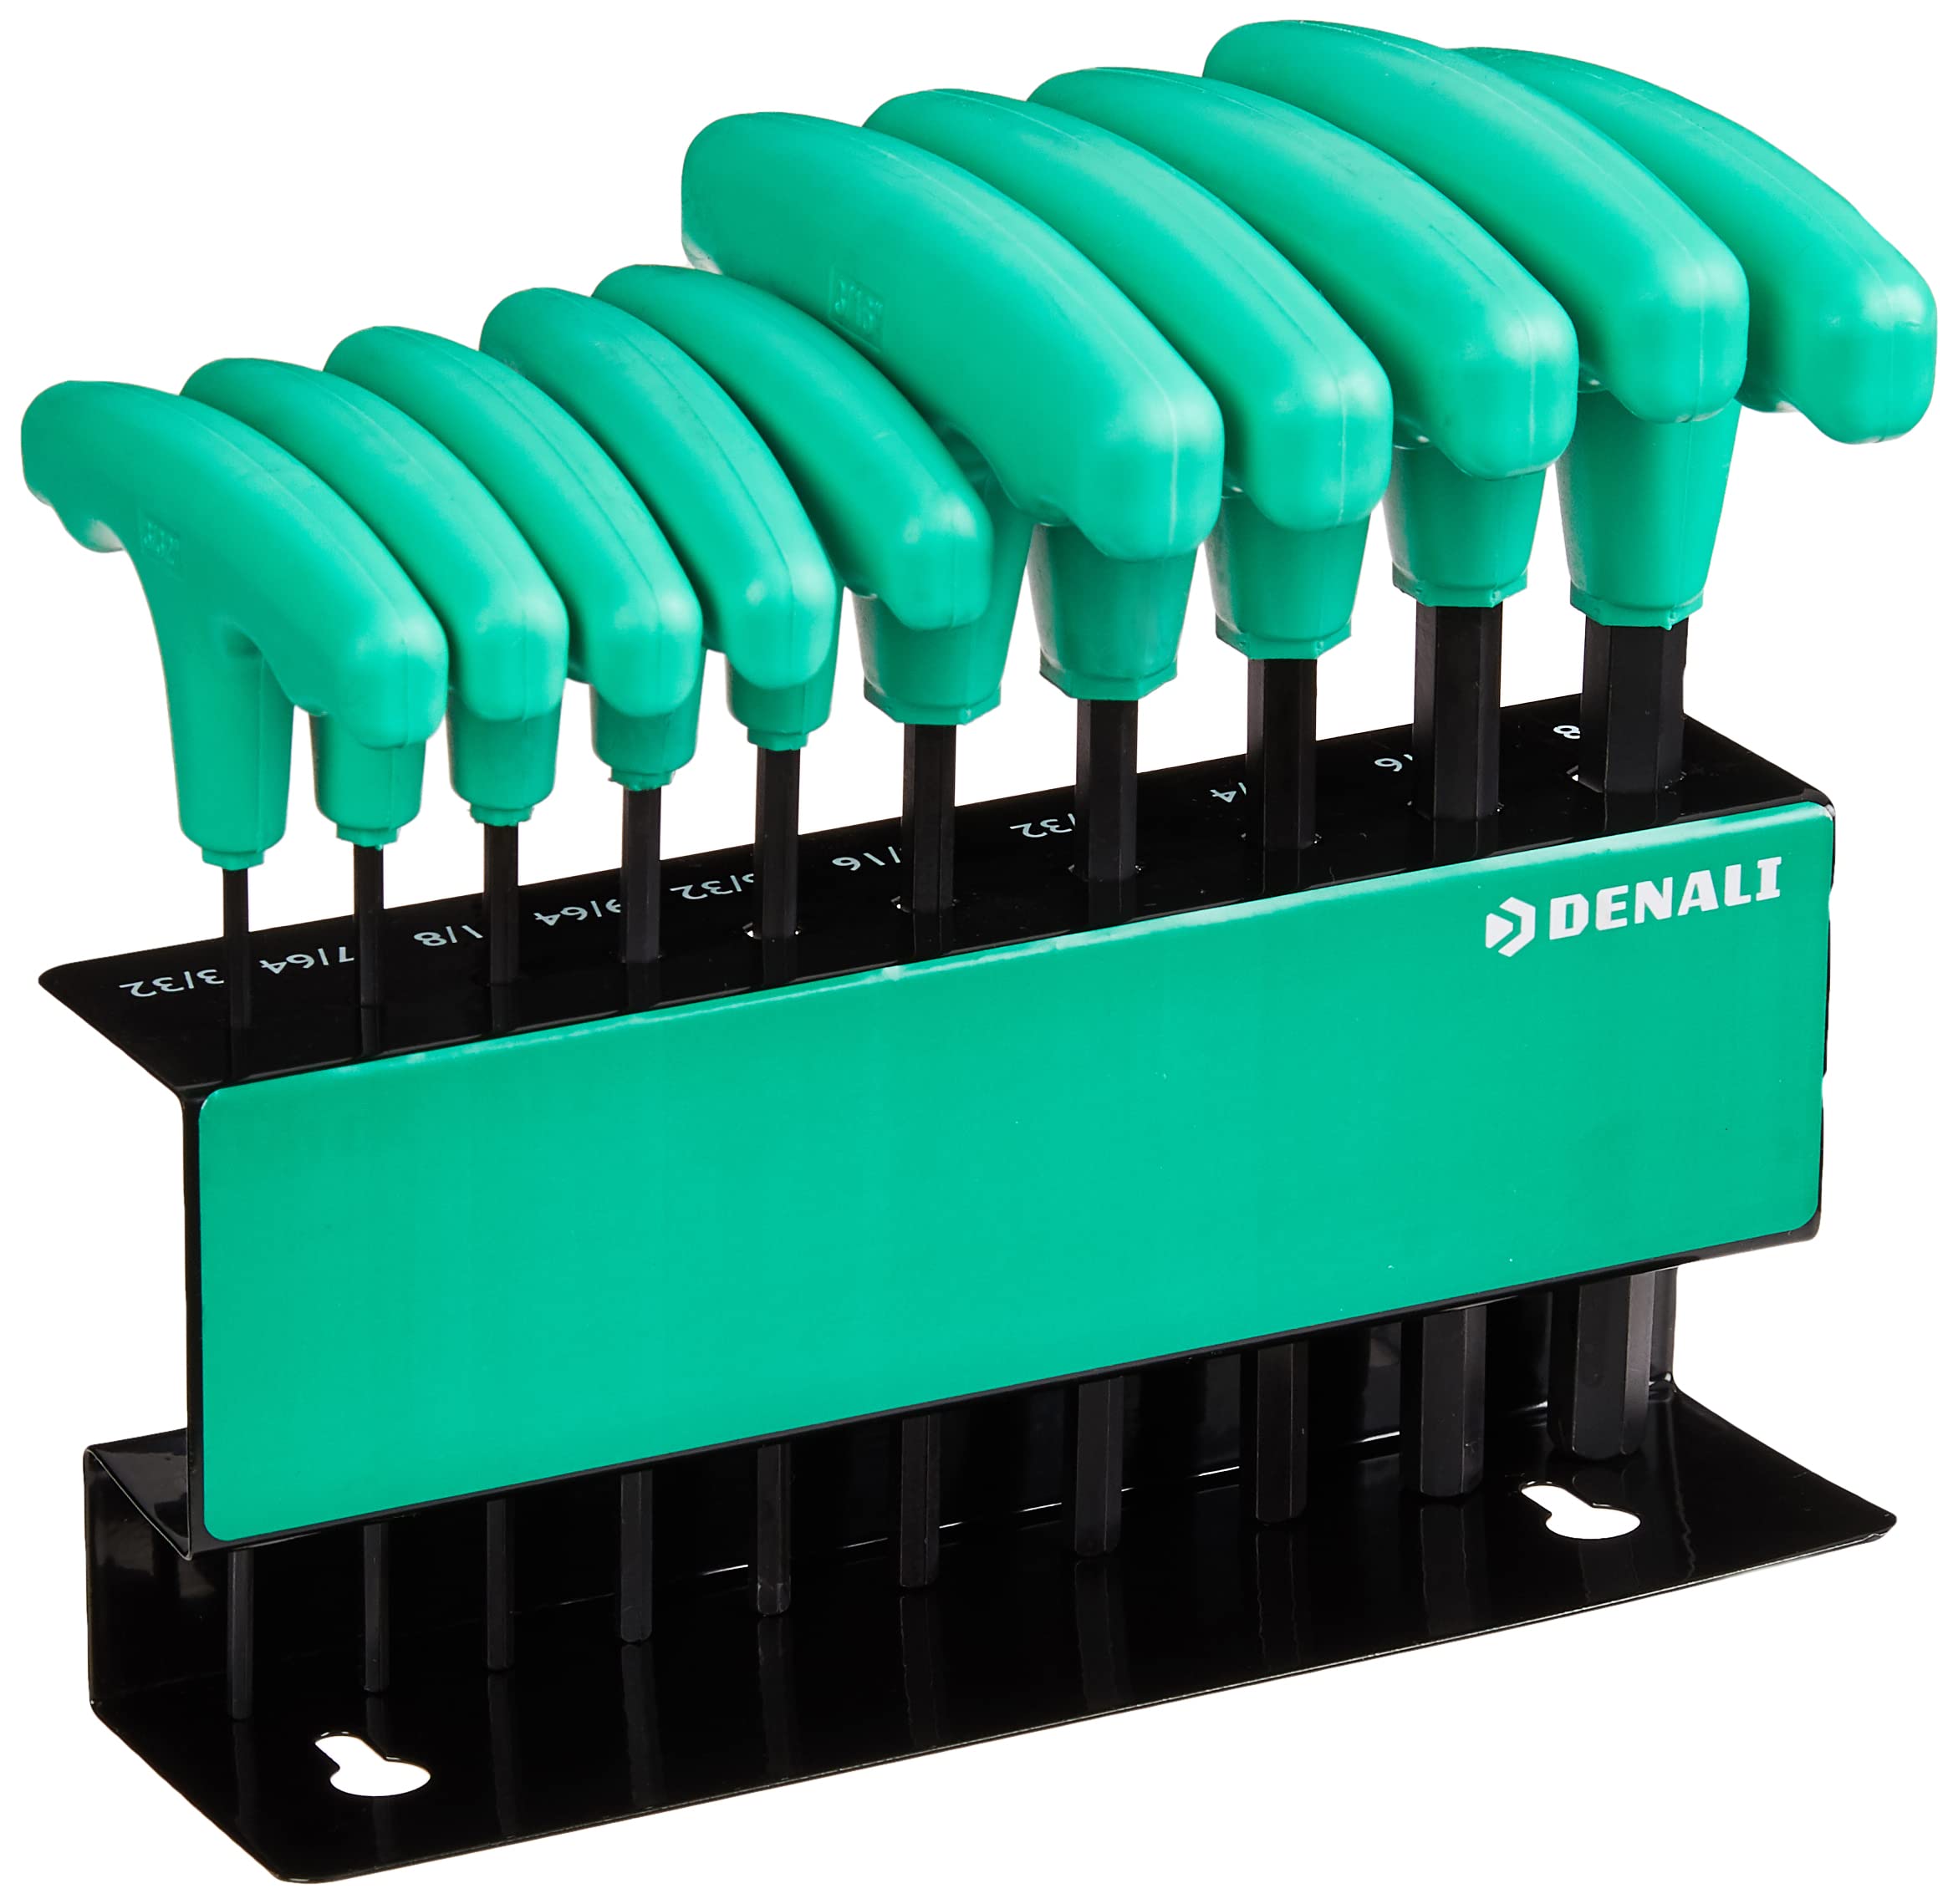 10-Piece Amazon Brand Denali T-Handle Hex Key Set w/ Stand (3/32" - 3/8") $15 + Free Shipping w/ Prime or on orders $25+